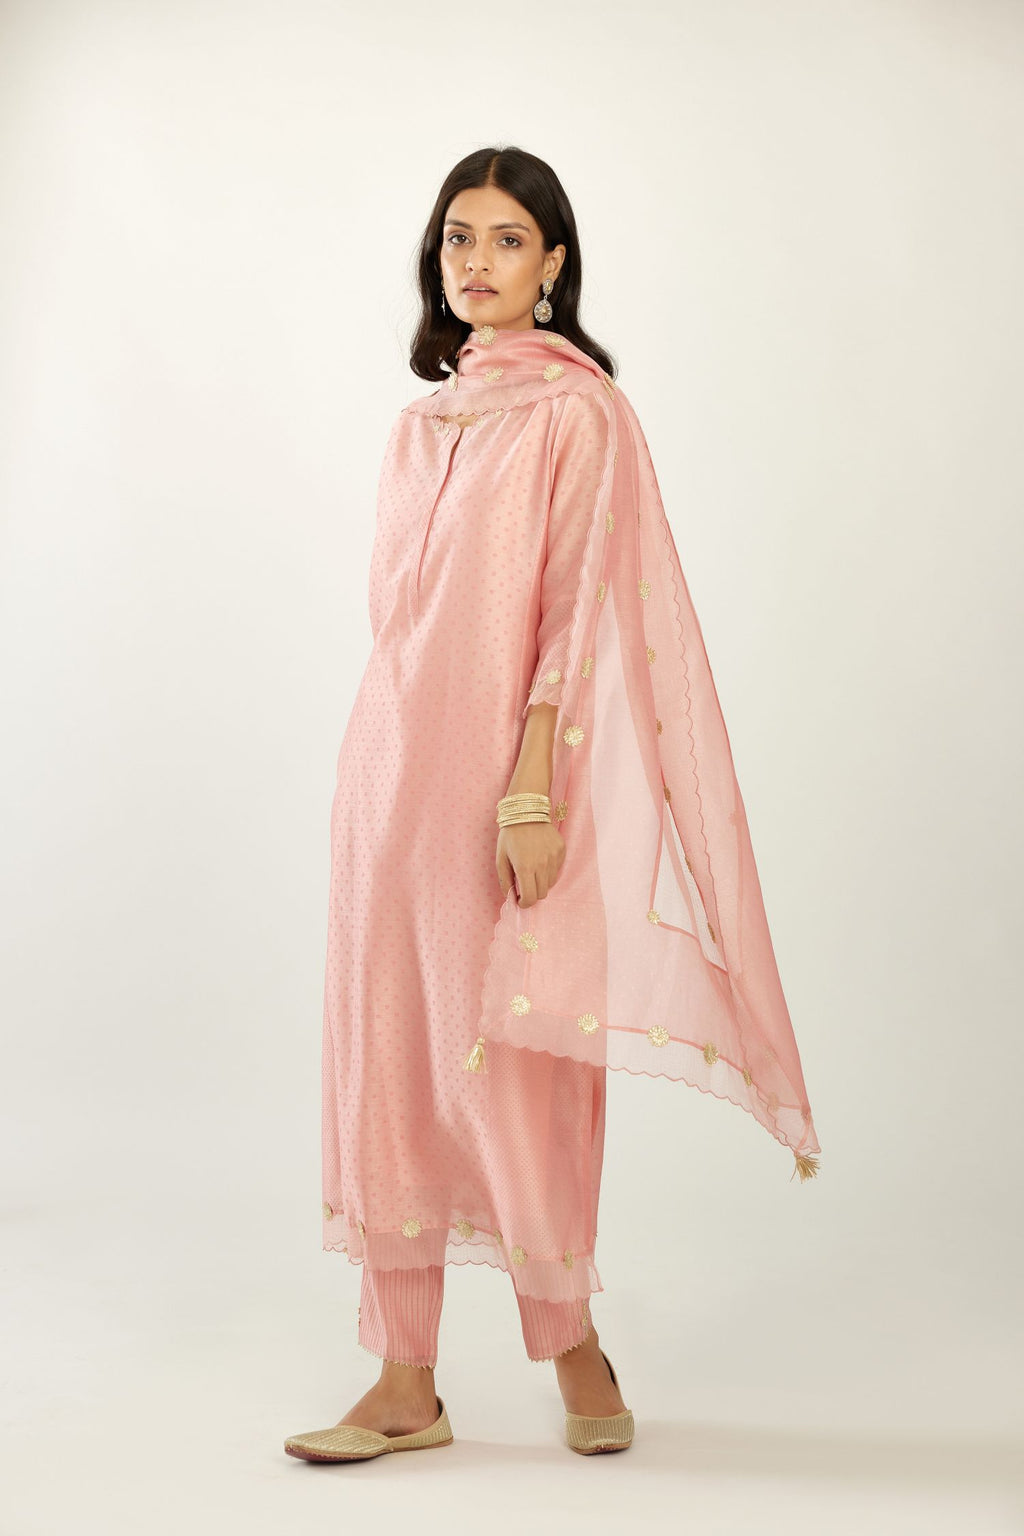 Pink hand block printed silk chanderi kurta set with concealed button placket neckline, Highlighted with gota flower and scalloped organza at edges.